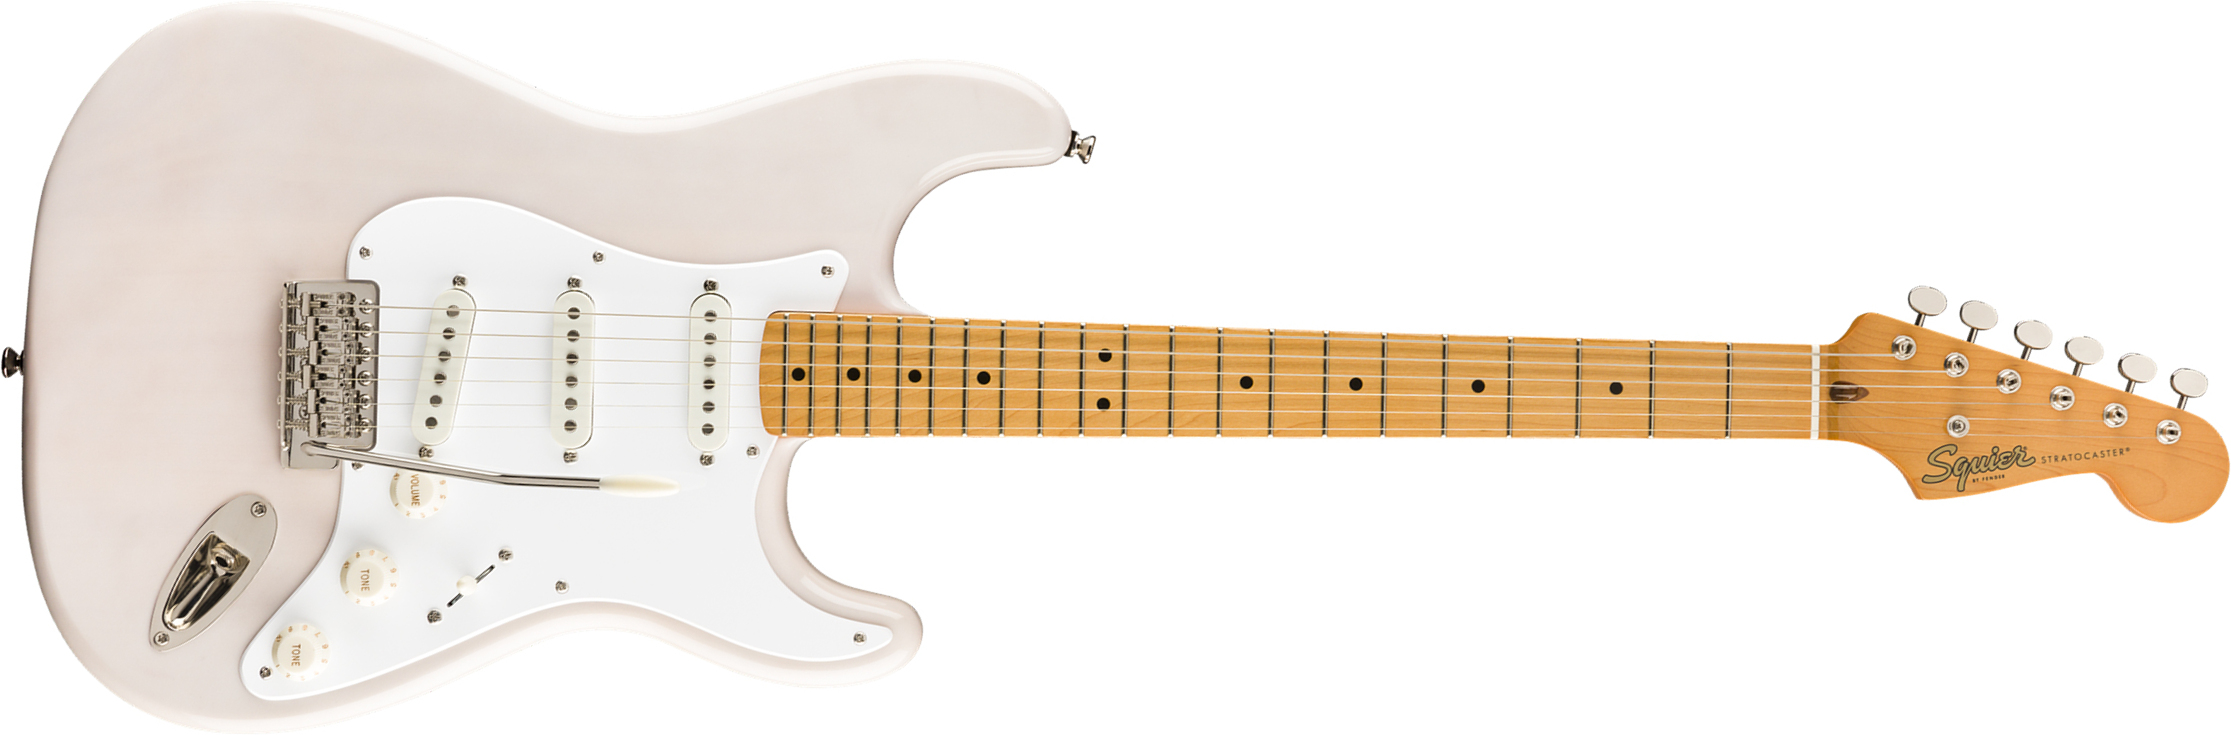 Squier Strat '50s Classic Vibe 2019 Mn 2019 - White Blonde - Str shape electric guitar - Main picture